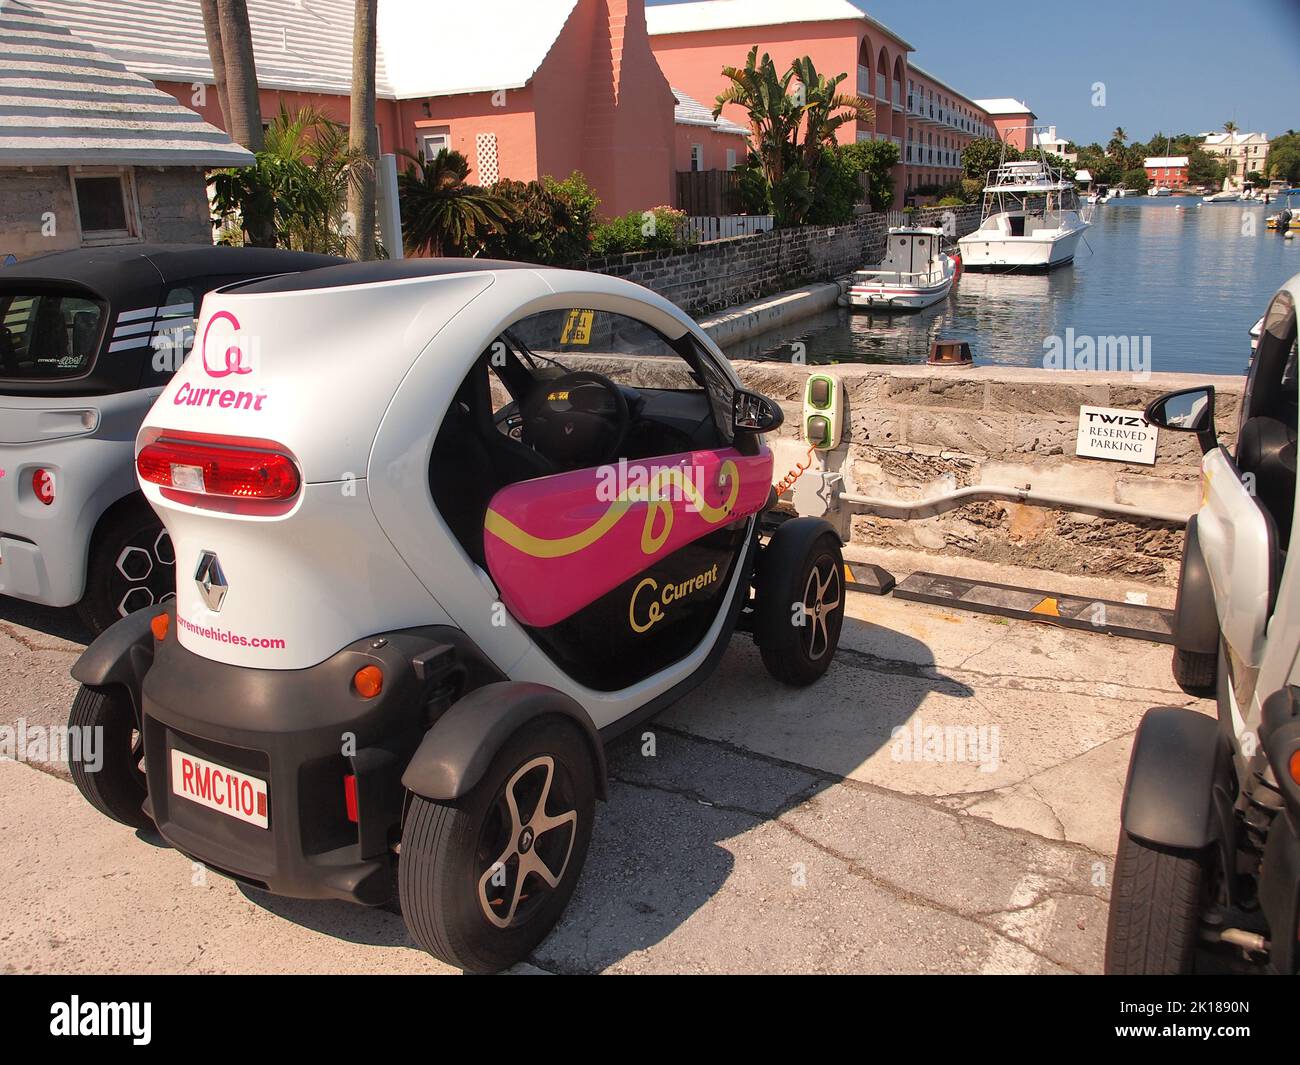 Renault Twizzy in Bermuda. An electric alternative to scooters and busses they are economical and safe. Stock Photo